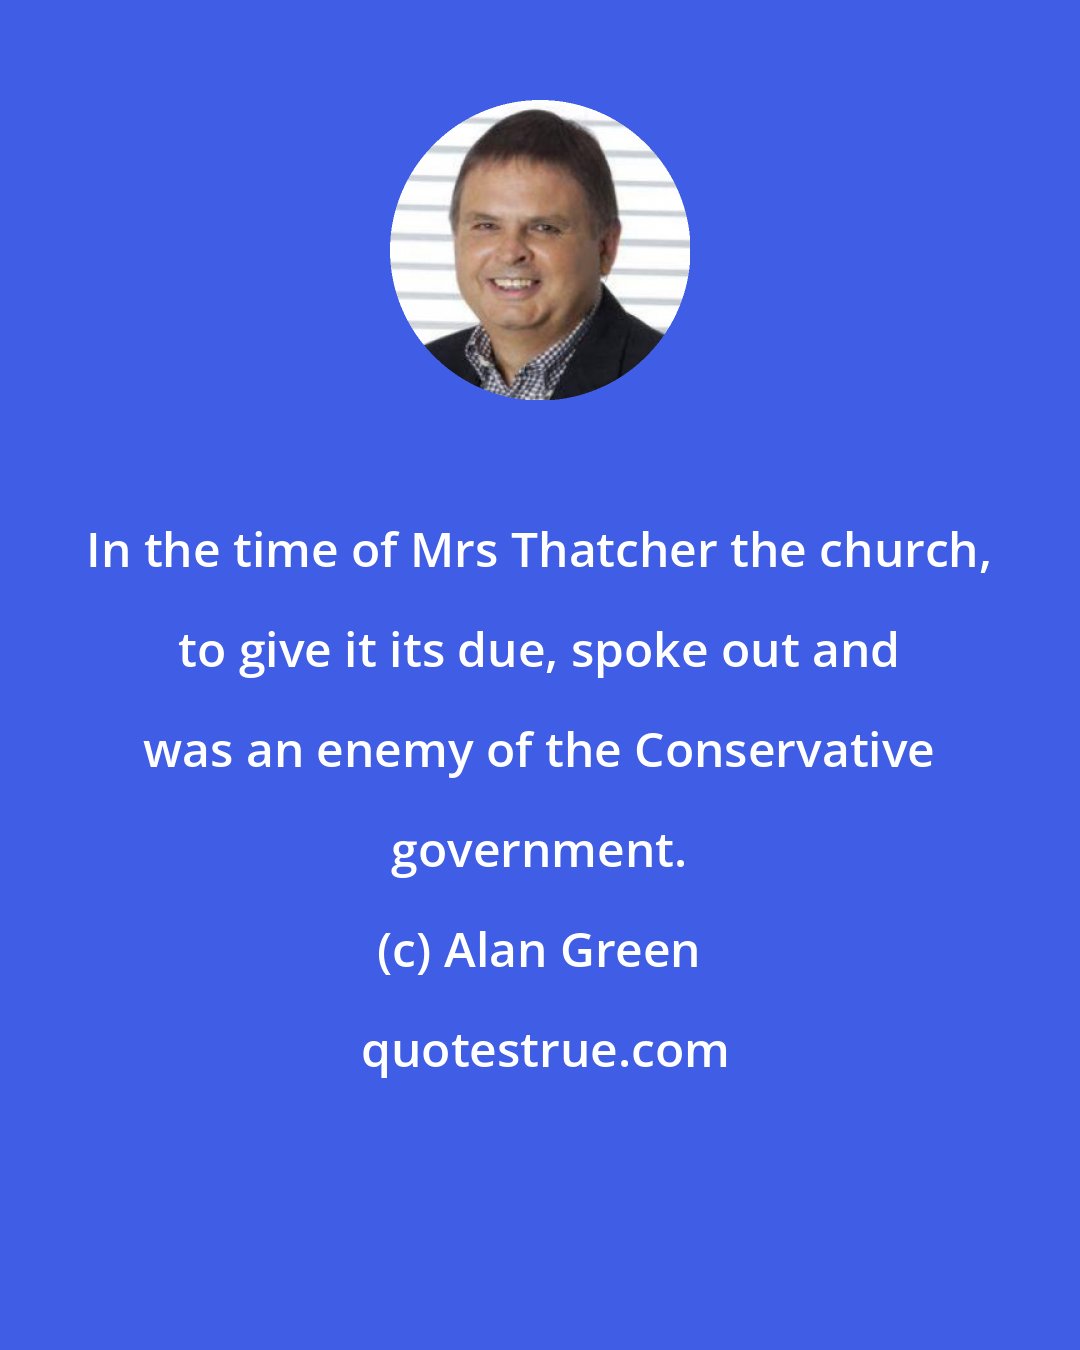 Alan Green: In the time of Mrs Thatcher the church, to give it its due, spoke out and was an enemy of the Conservative government.